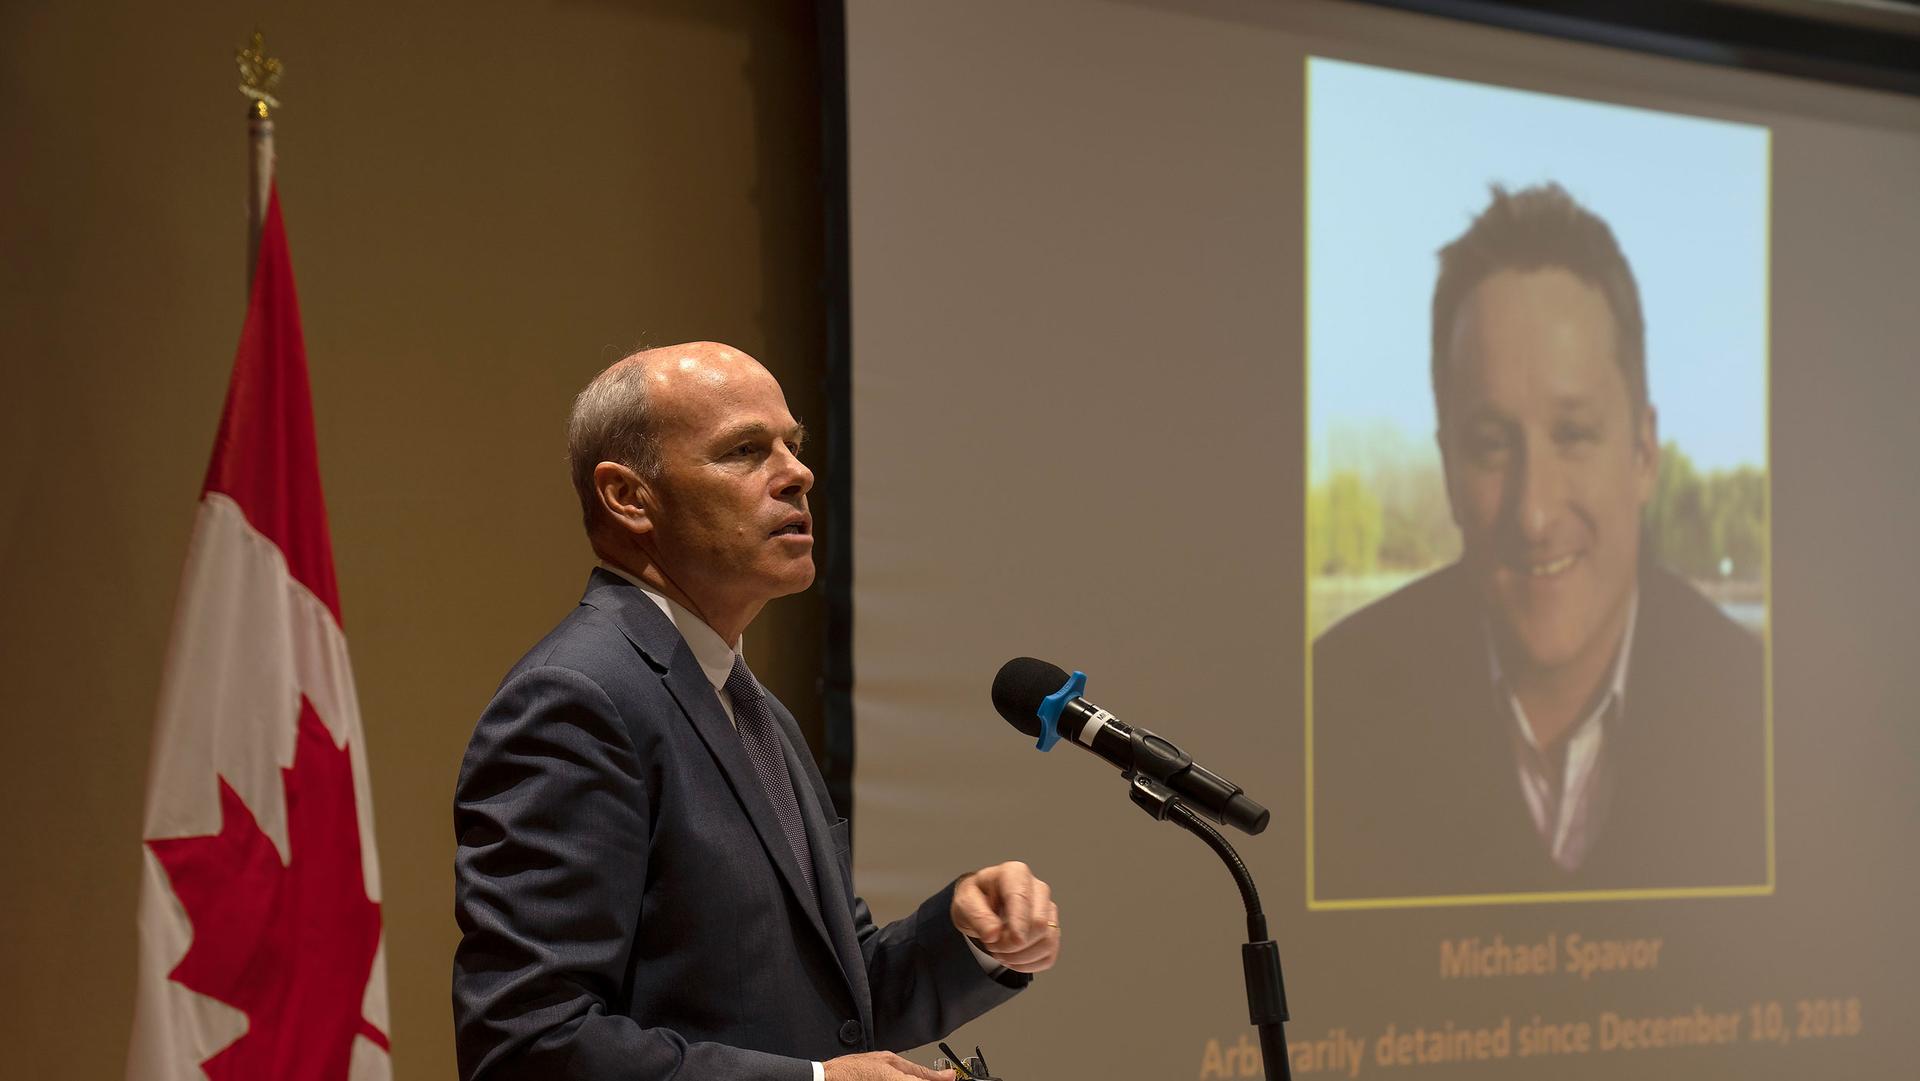 Jim Nickel is shown wearing a suit and tie while speaking into a microphone with an image of Michael Spavor projected on a screen in the background.